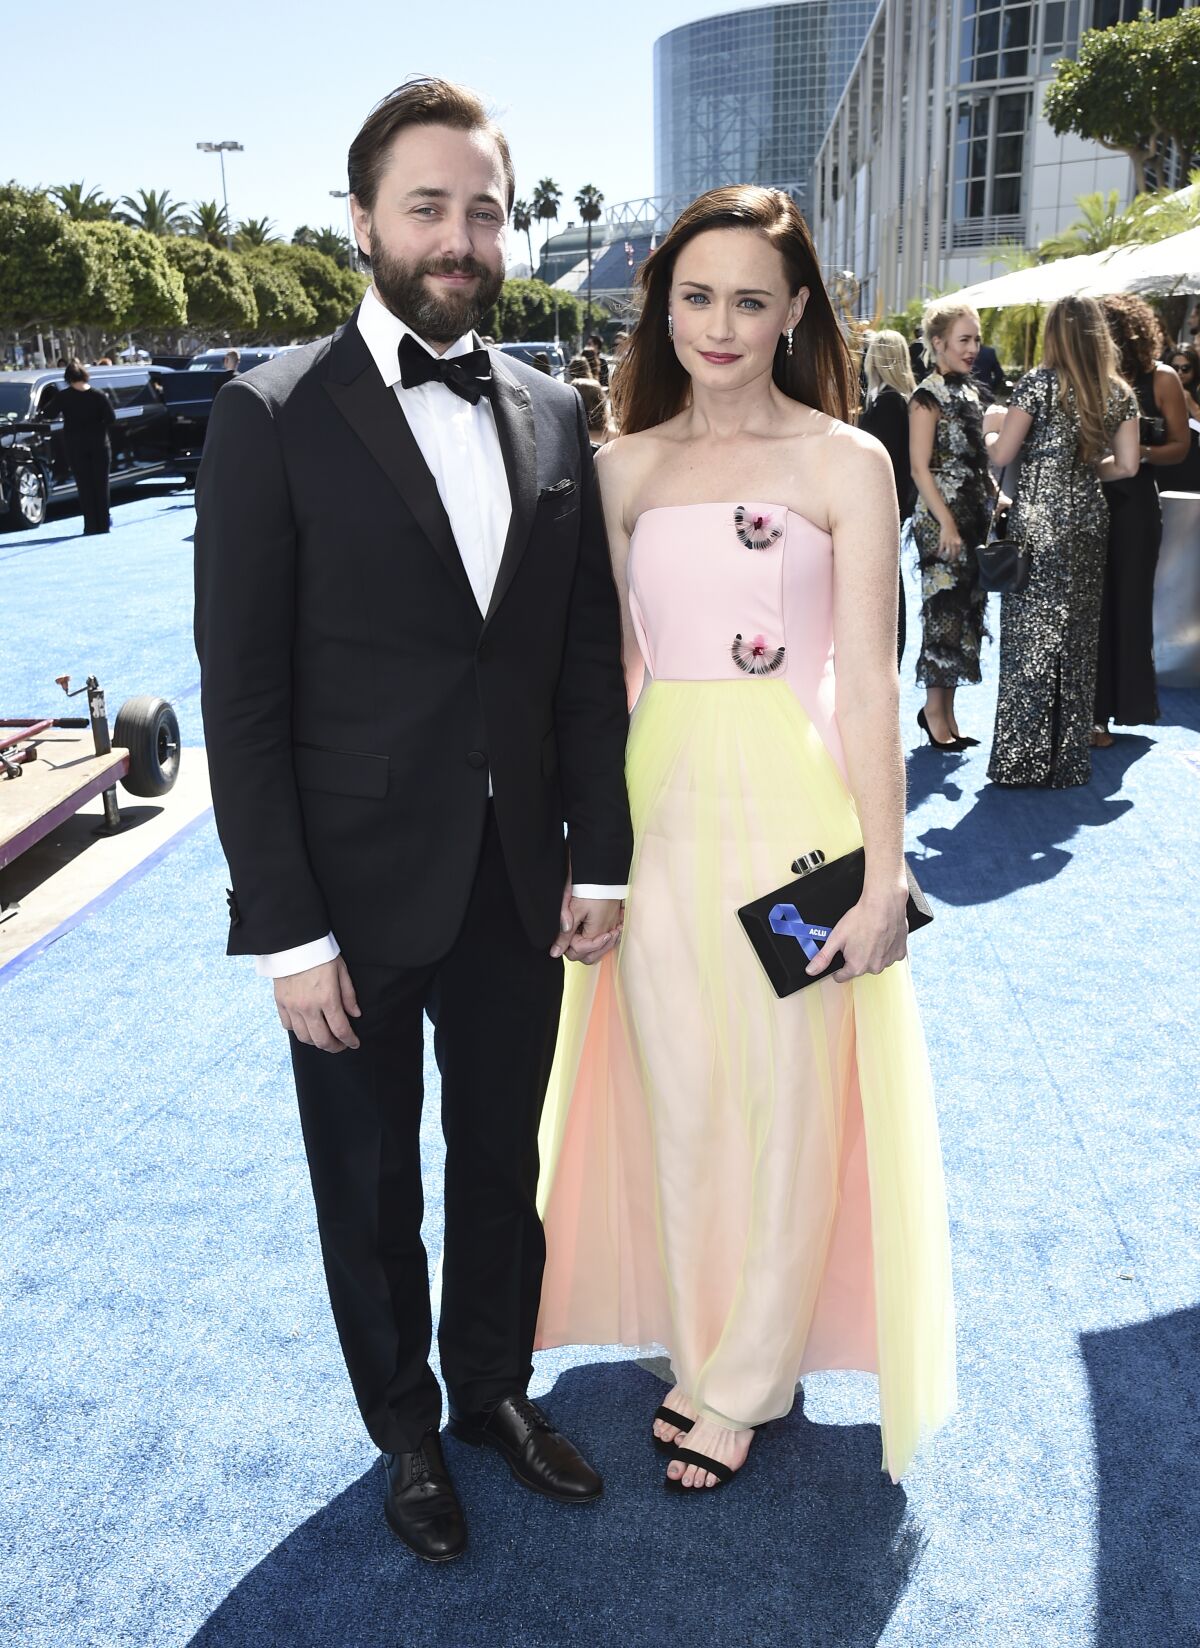 A bearded man in a tuxedo stands next to a woman wearing a pink and orange gown on a blue carpet.